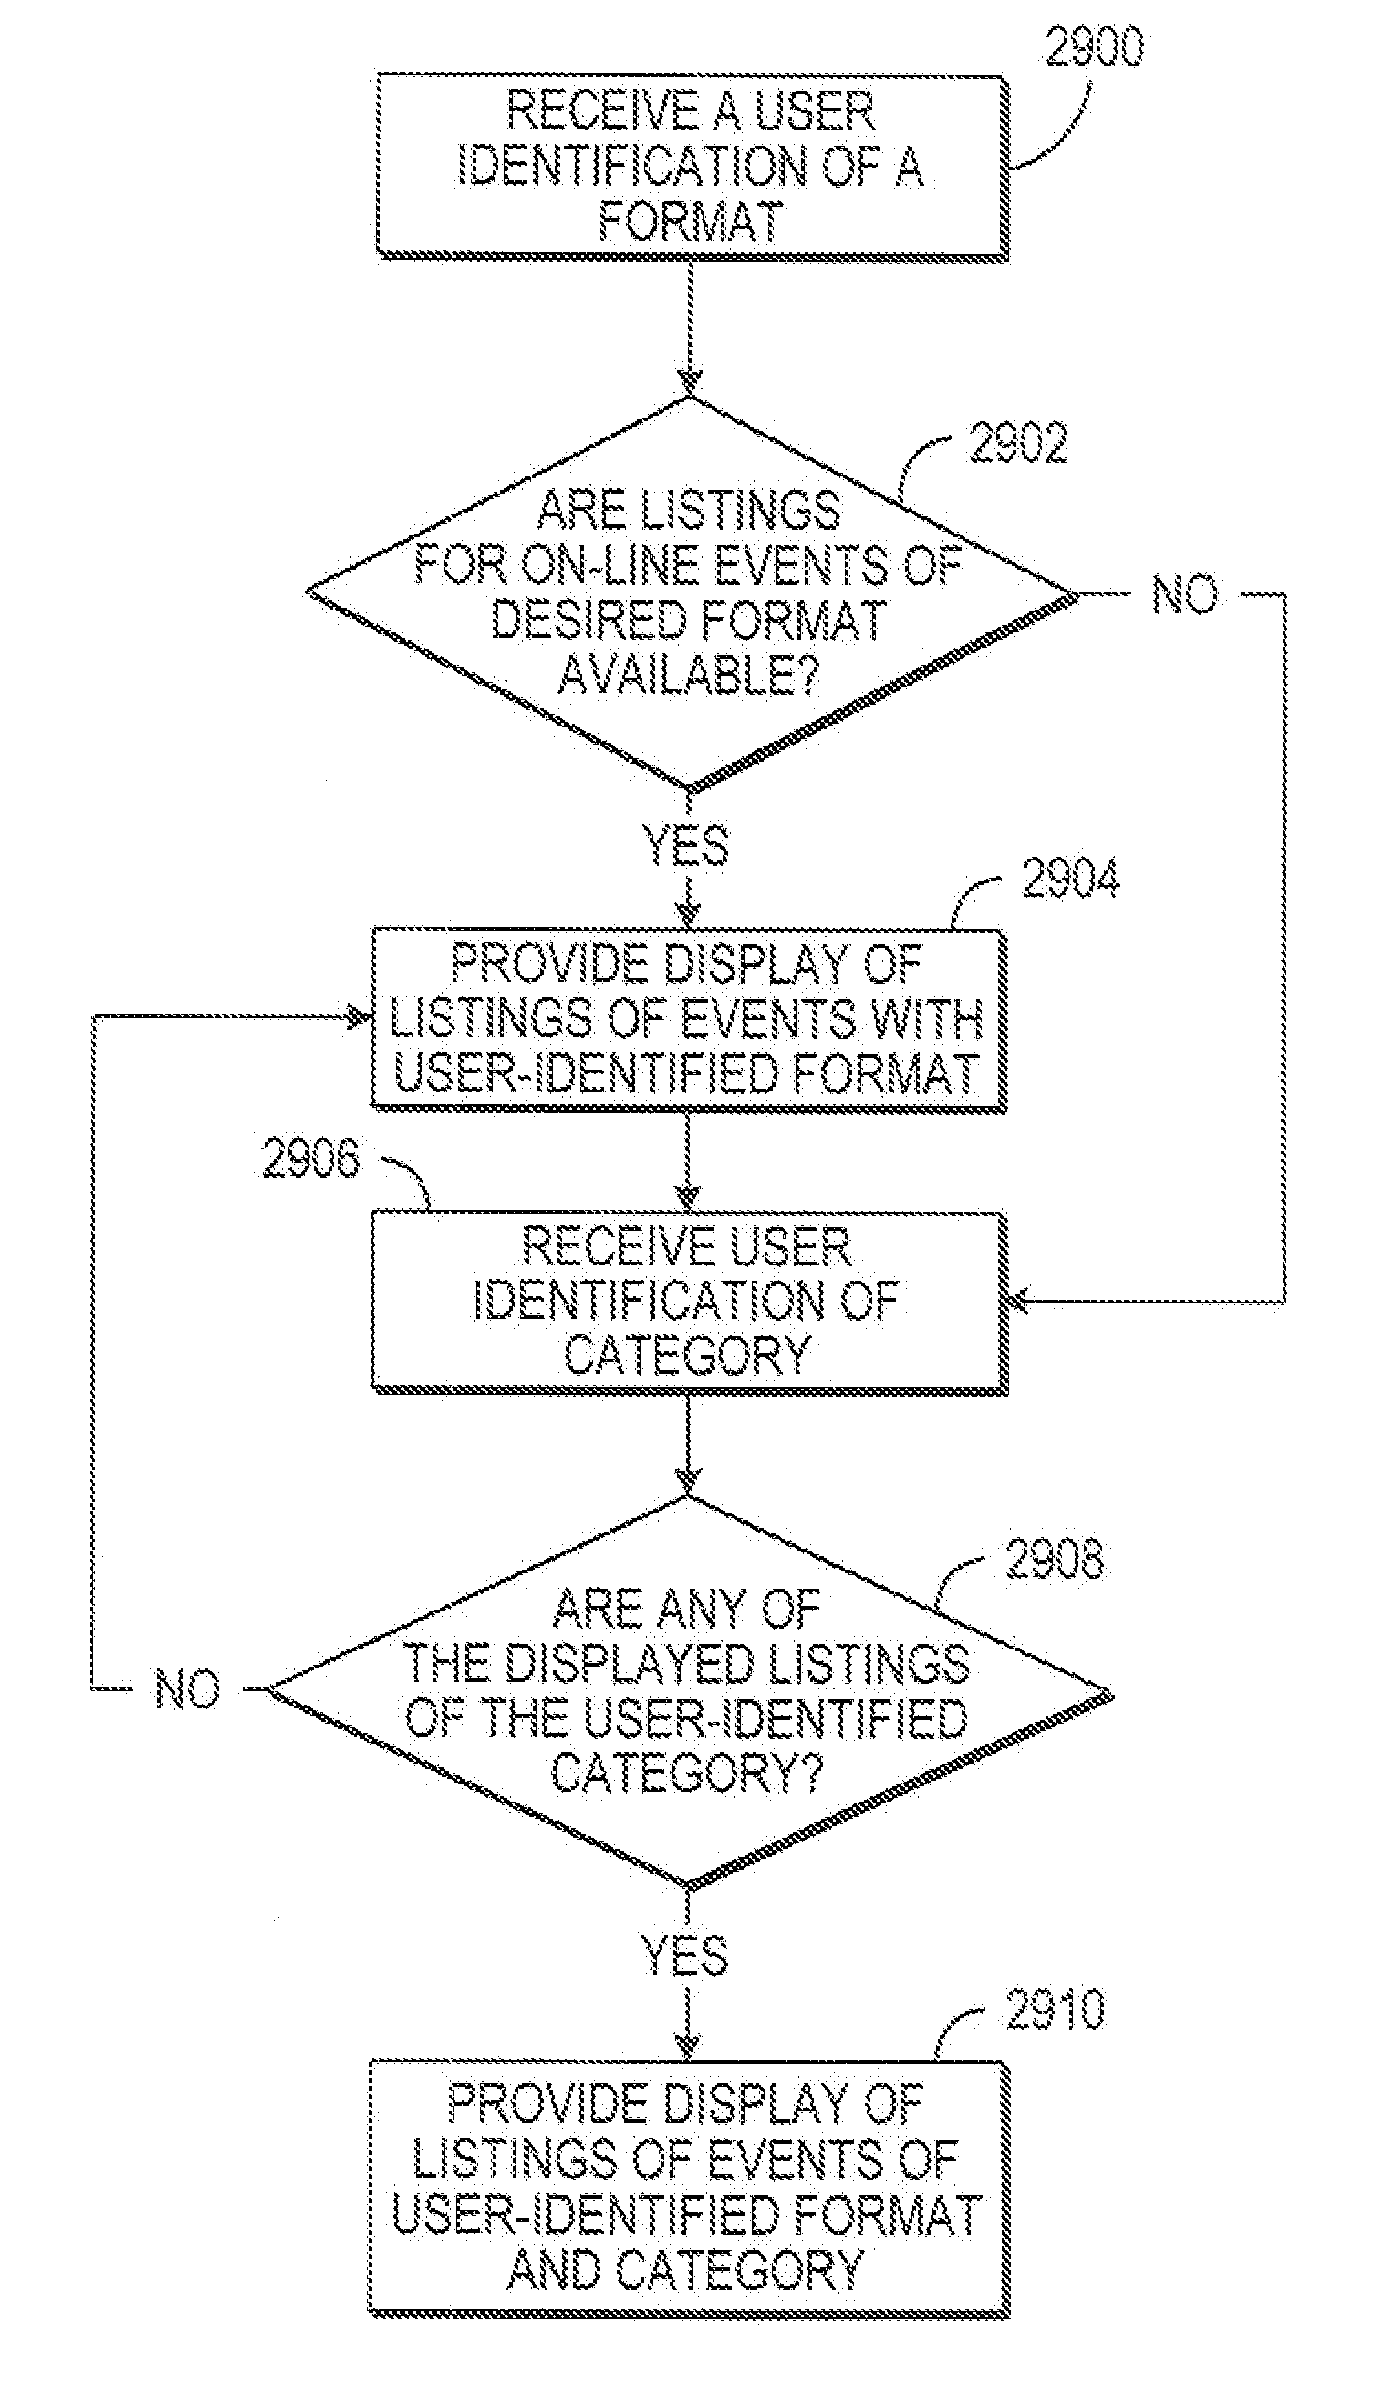 Systems and methods for providing a guide to on-line events